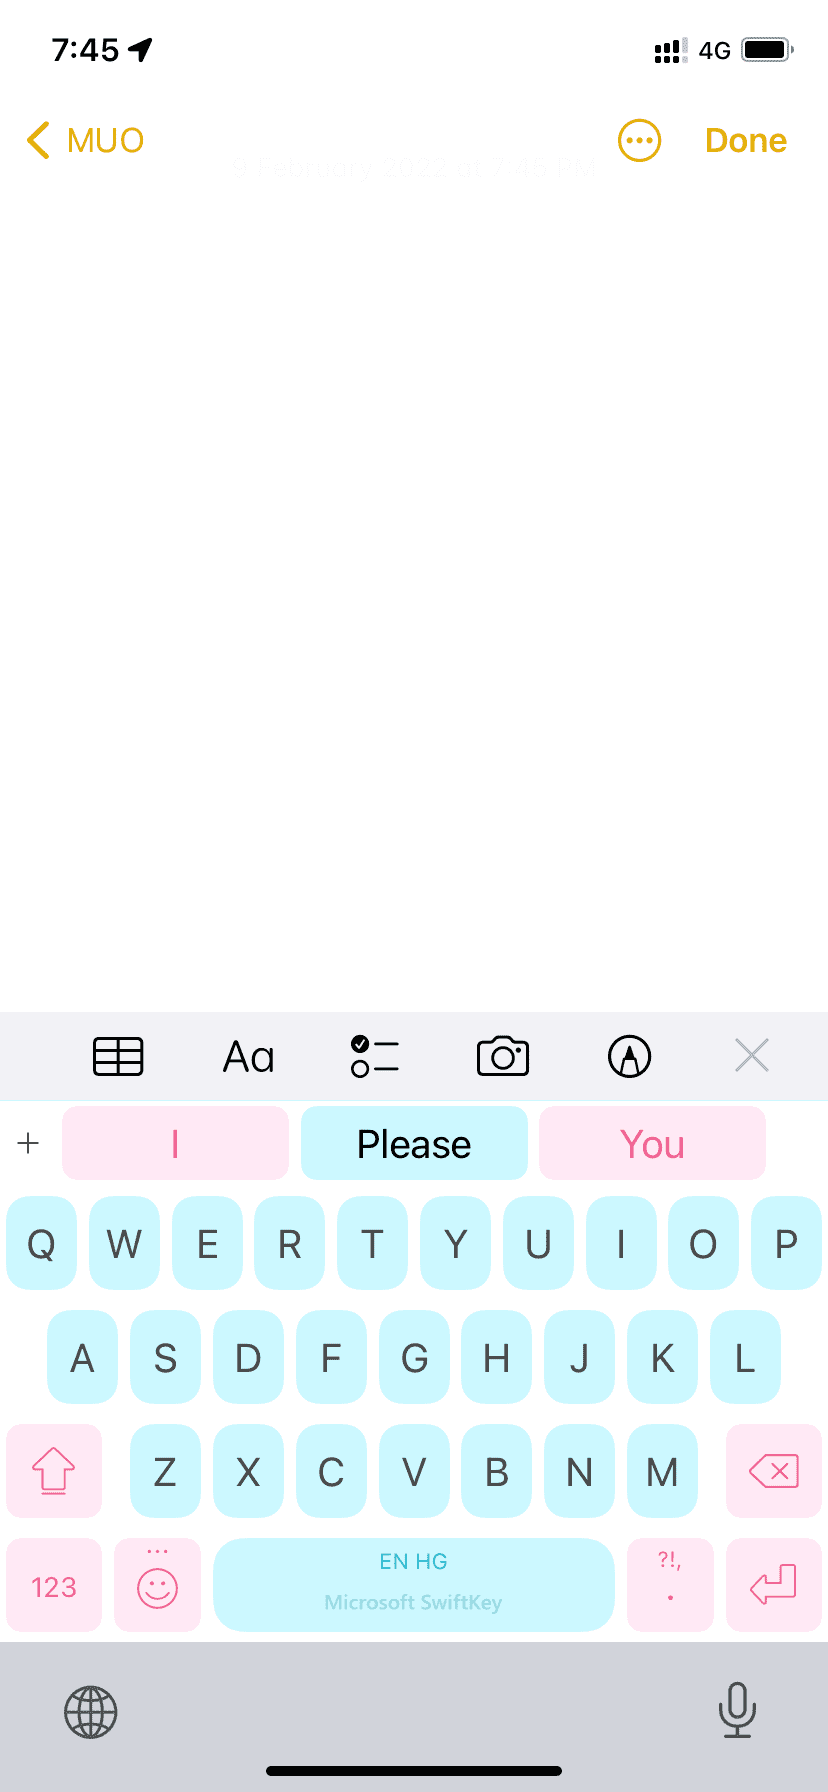 Third-party keyboard on iPhone screen